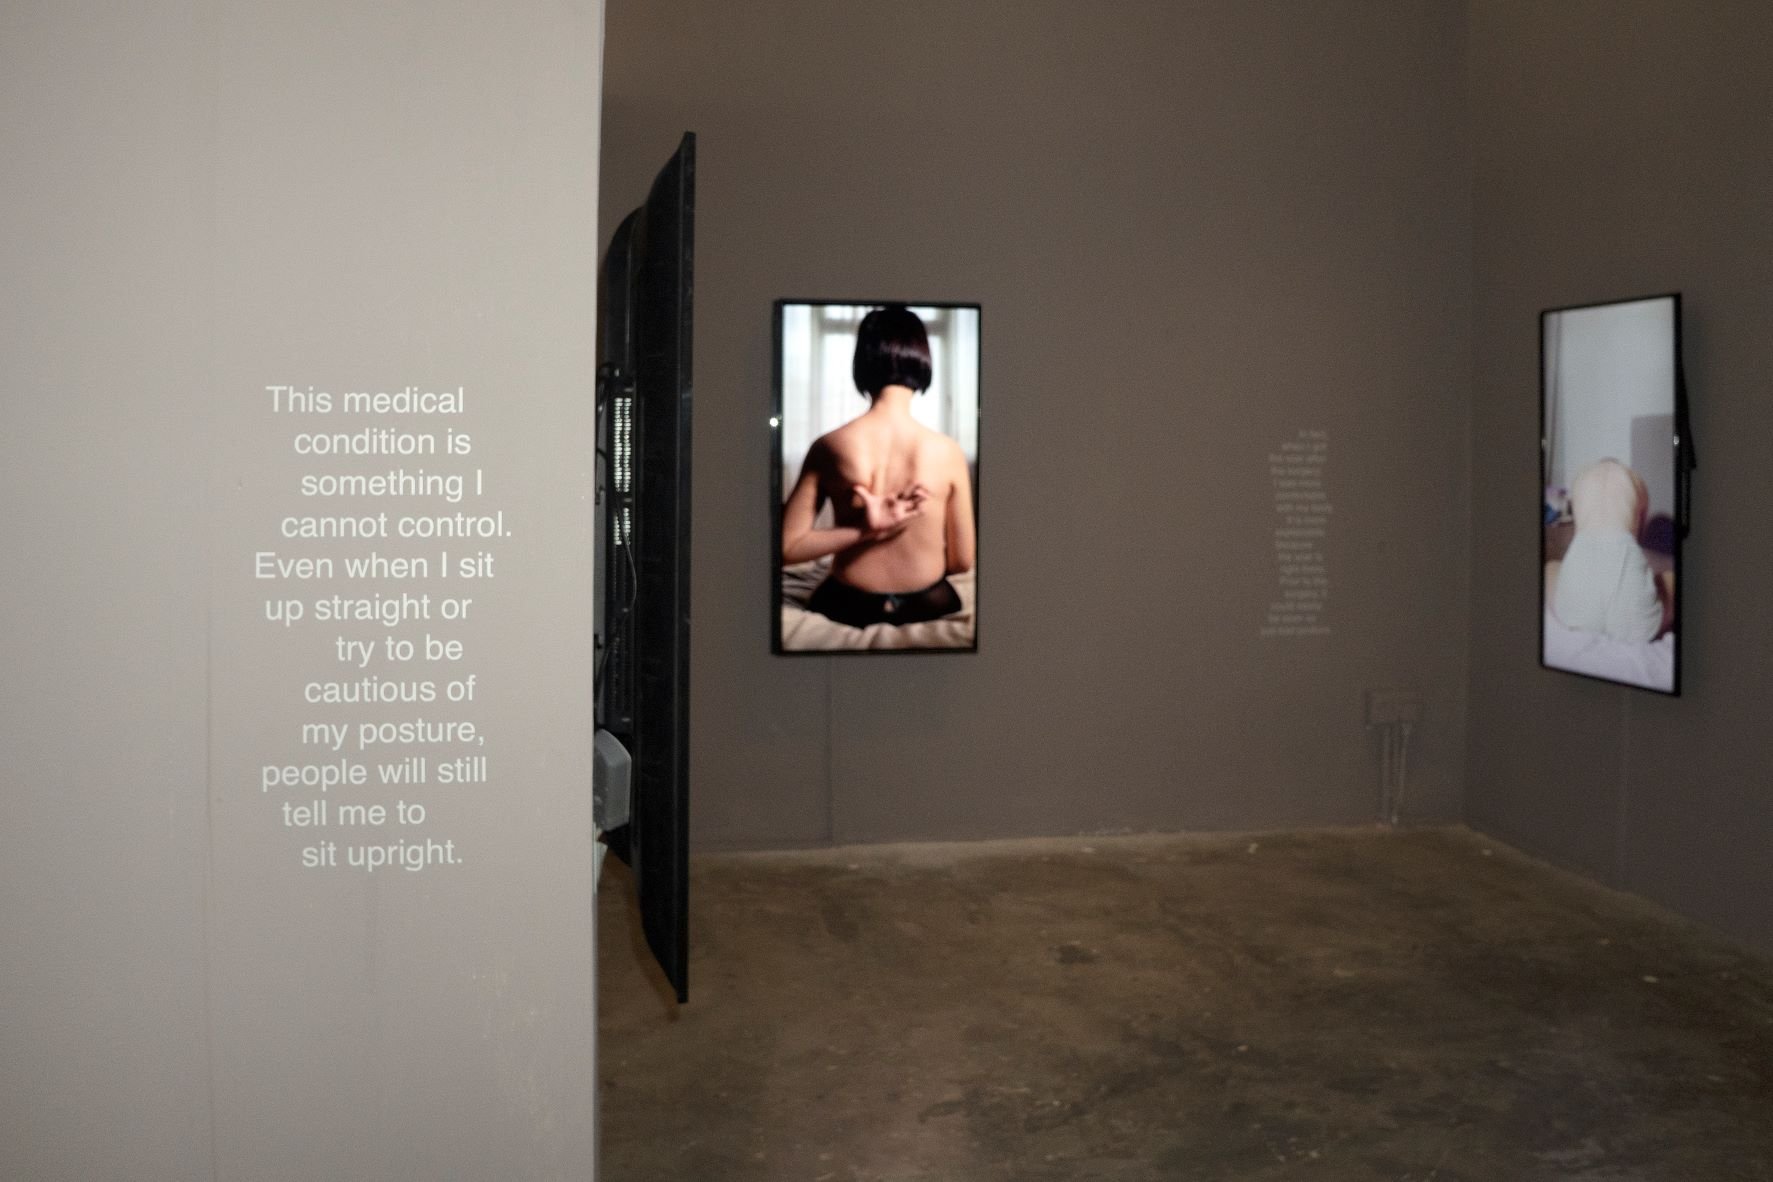  Woong Soak Teng, ‘rules for photographing a scoliotic patient’, 2022, exhibition installation view at Objectifs – Centre for Photography. Image courtesy of the artist. 